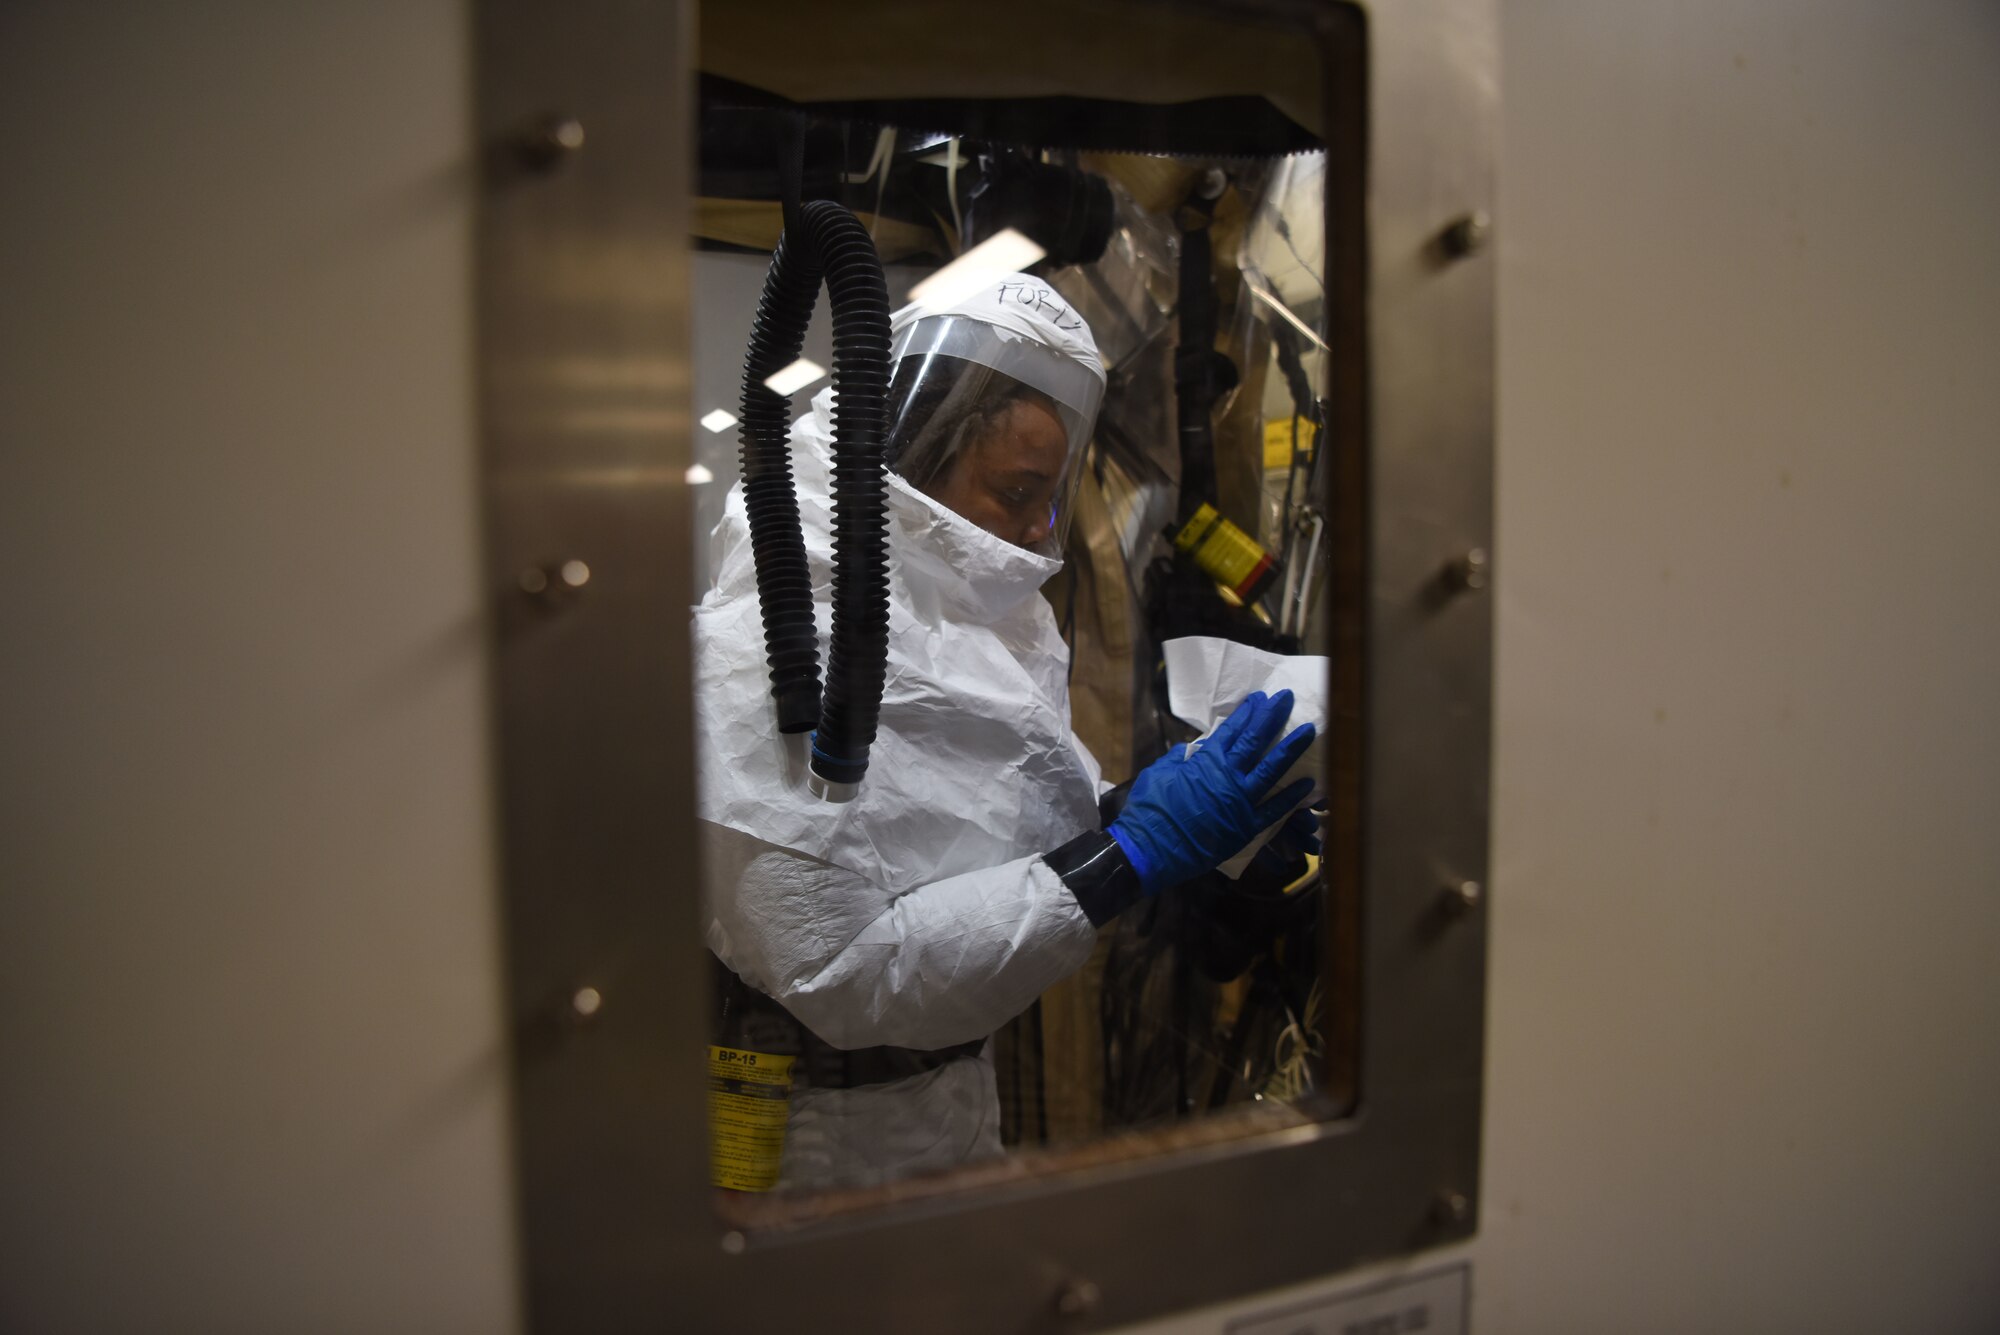 U.S. Air Force Airman 1st Class Andrea Ford, 313th Expeditionary Operations Support Squadron bio-environmental engineer, decontaminates a Transport Isolation System on a U.S. Air Force C-17 Globemaster III aircraft.